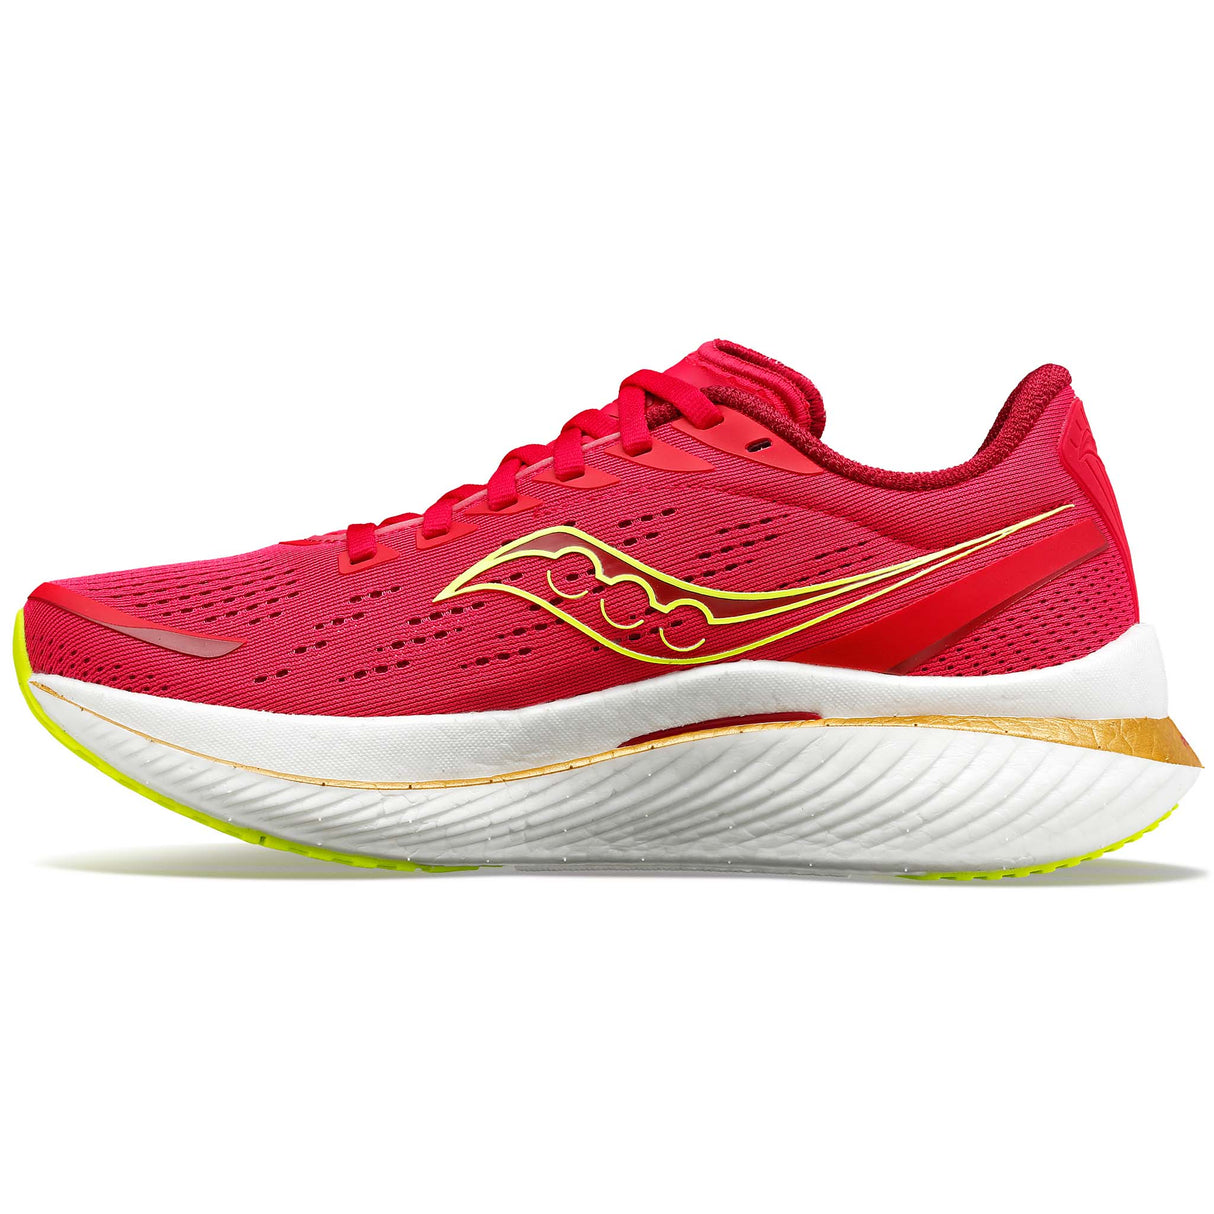 Saucony Endorphin Speed 3 souliers de course femme lateral rose rouge